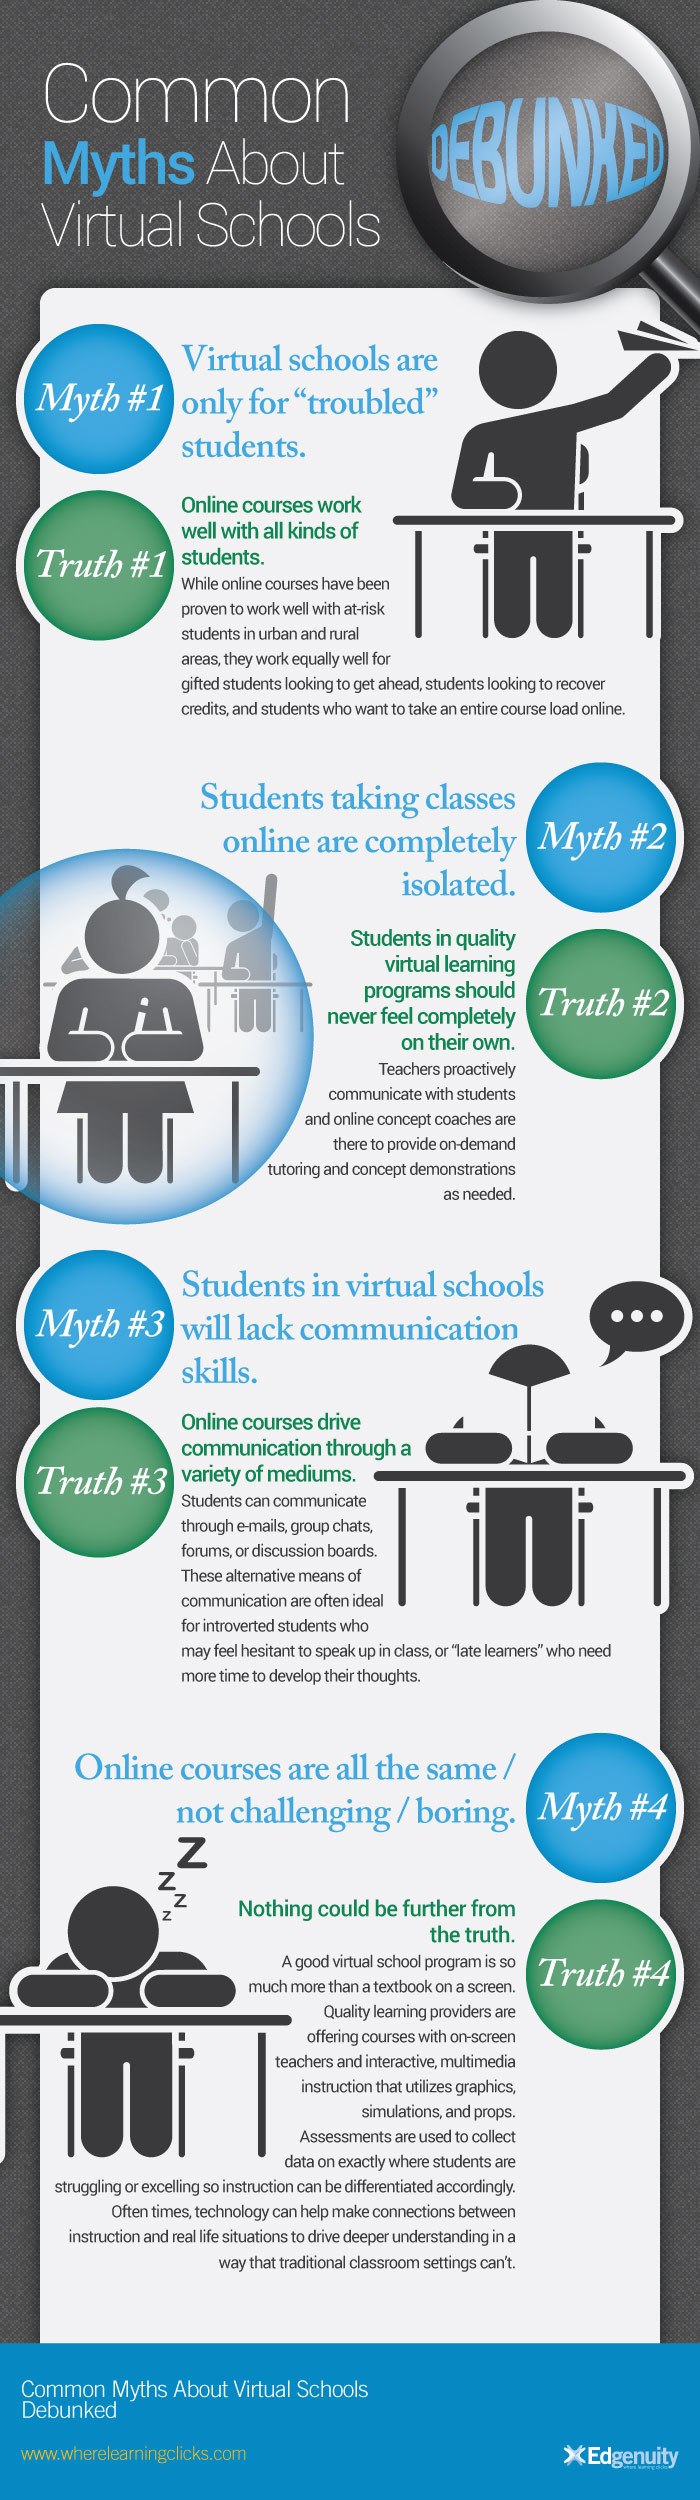 Debunking Common Myths About Virtual Schools Infographic